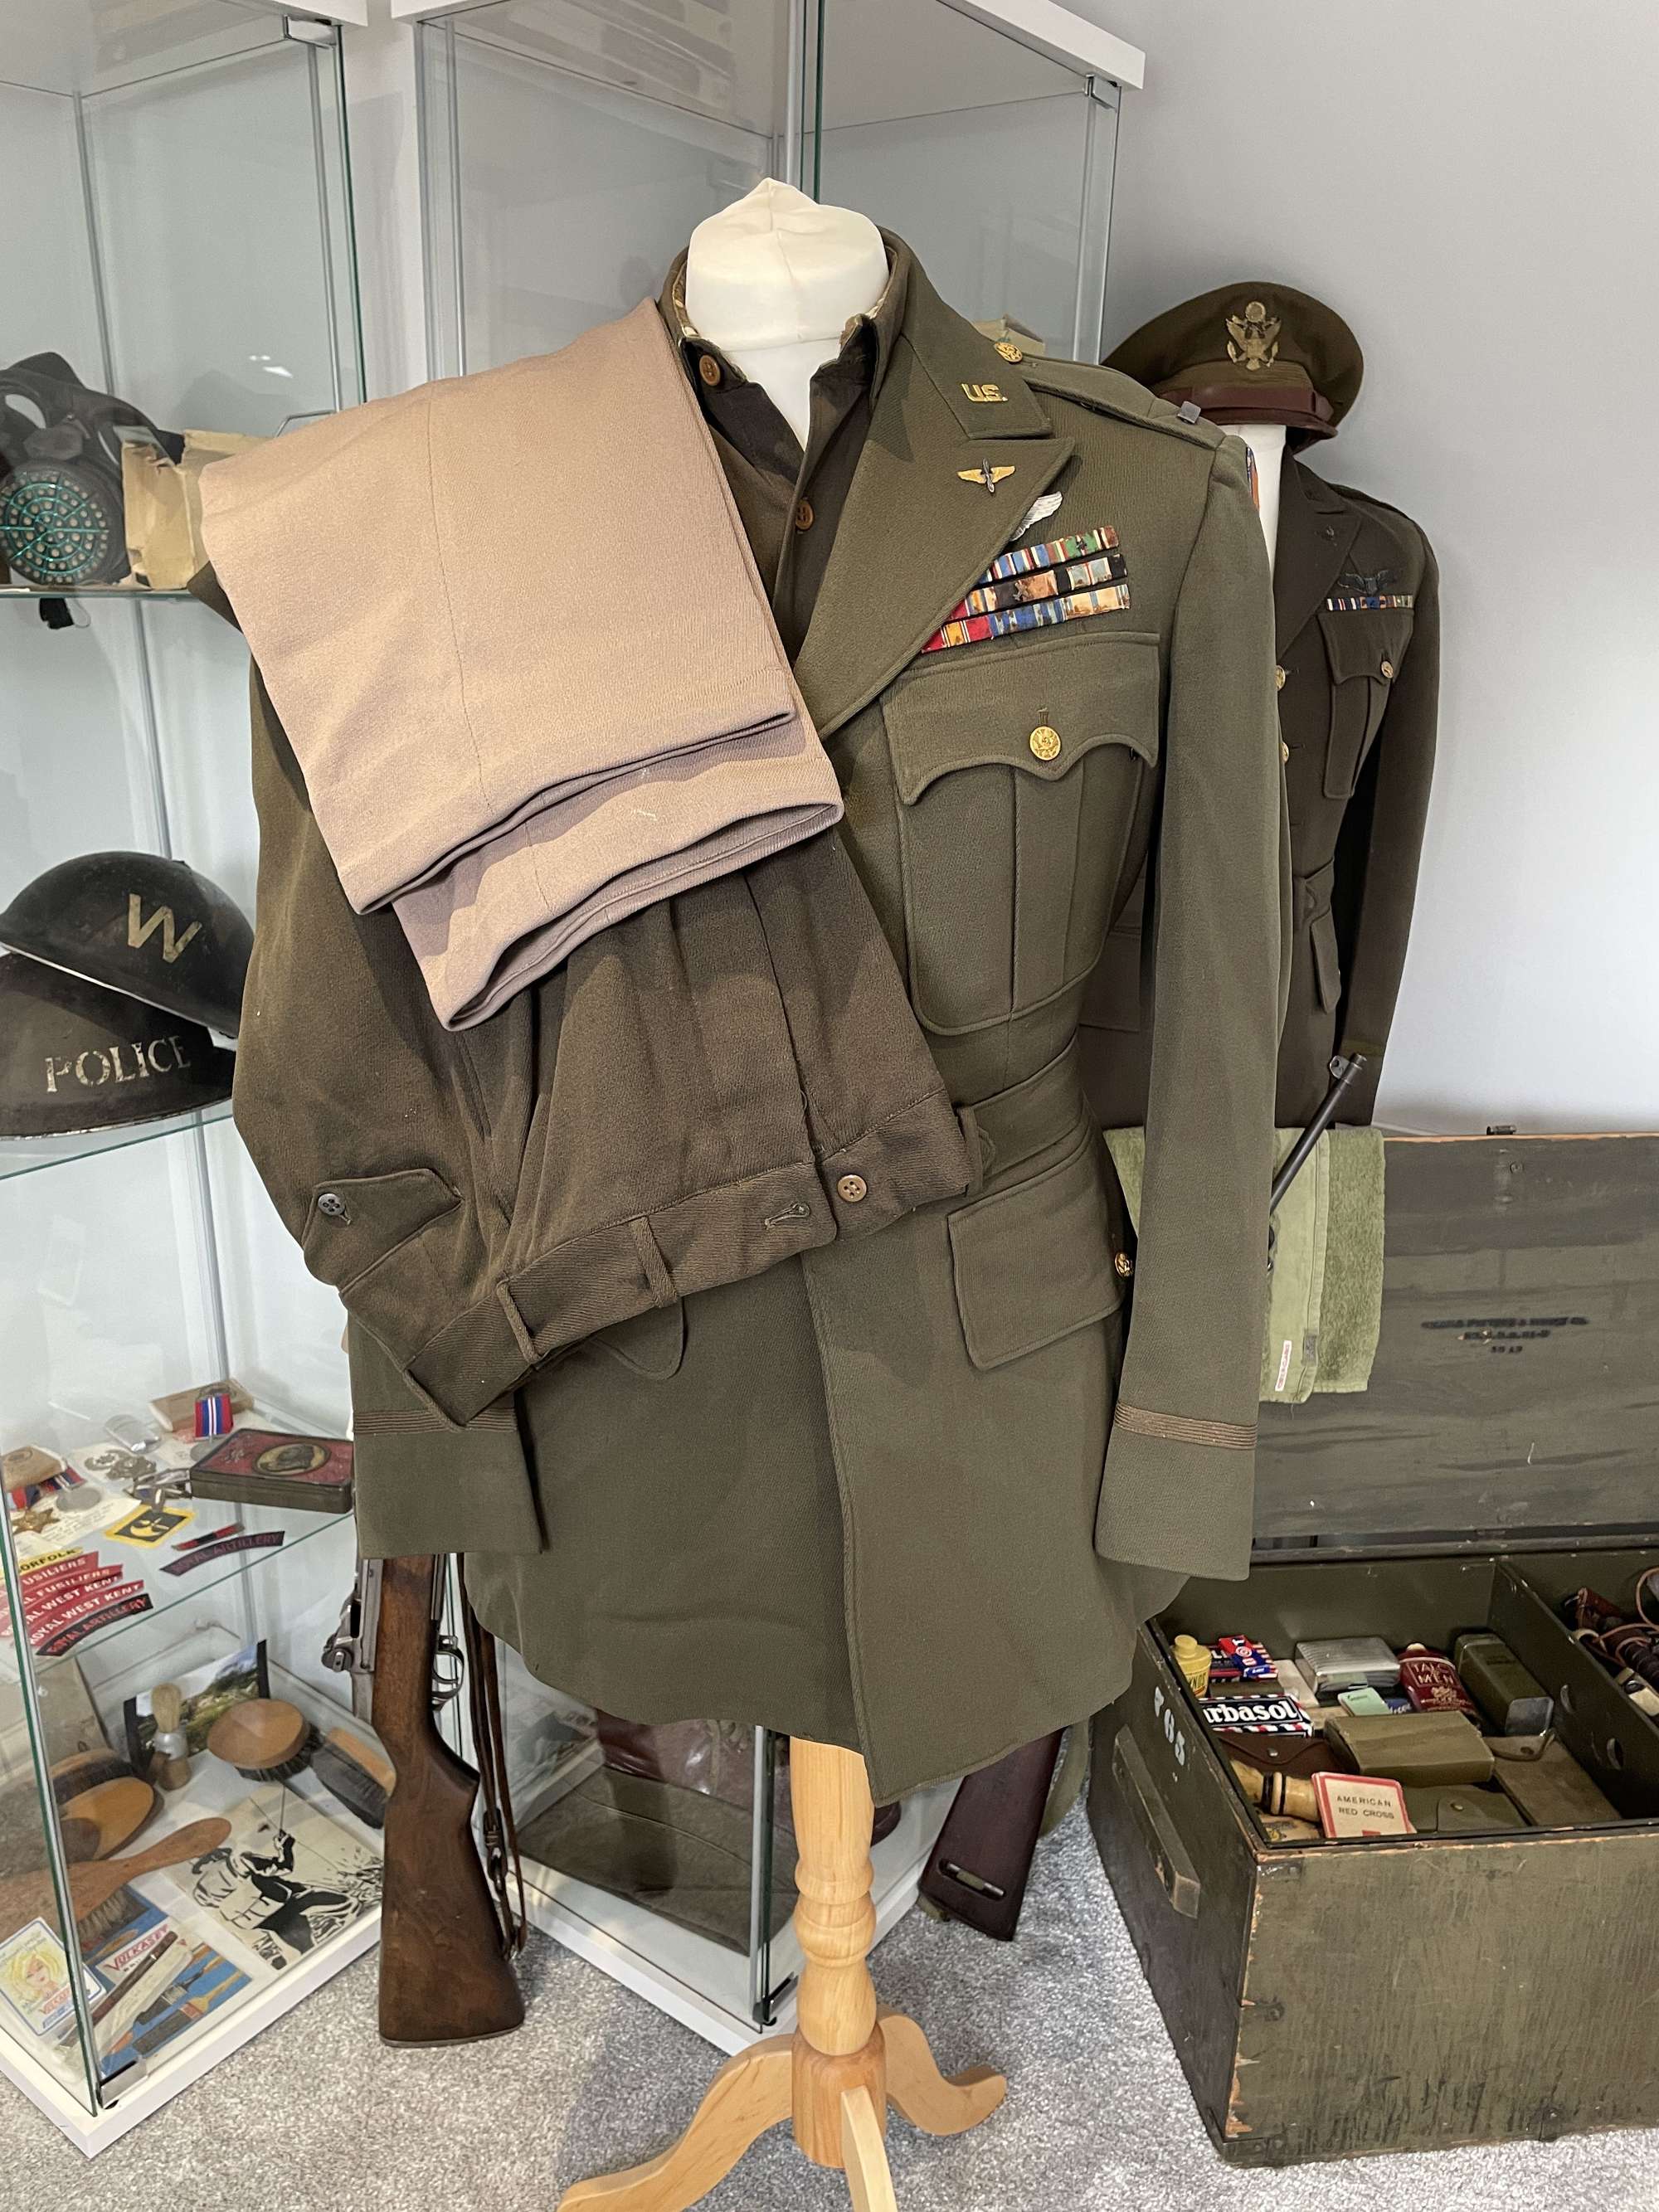 American WW2 Uniform Grouping, 8th Air Force, 487th Bomb Group, Lavenham, Large Size